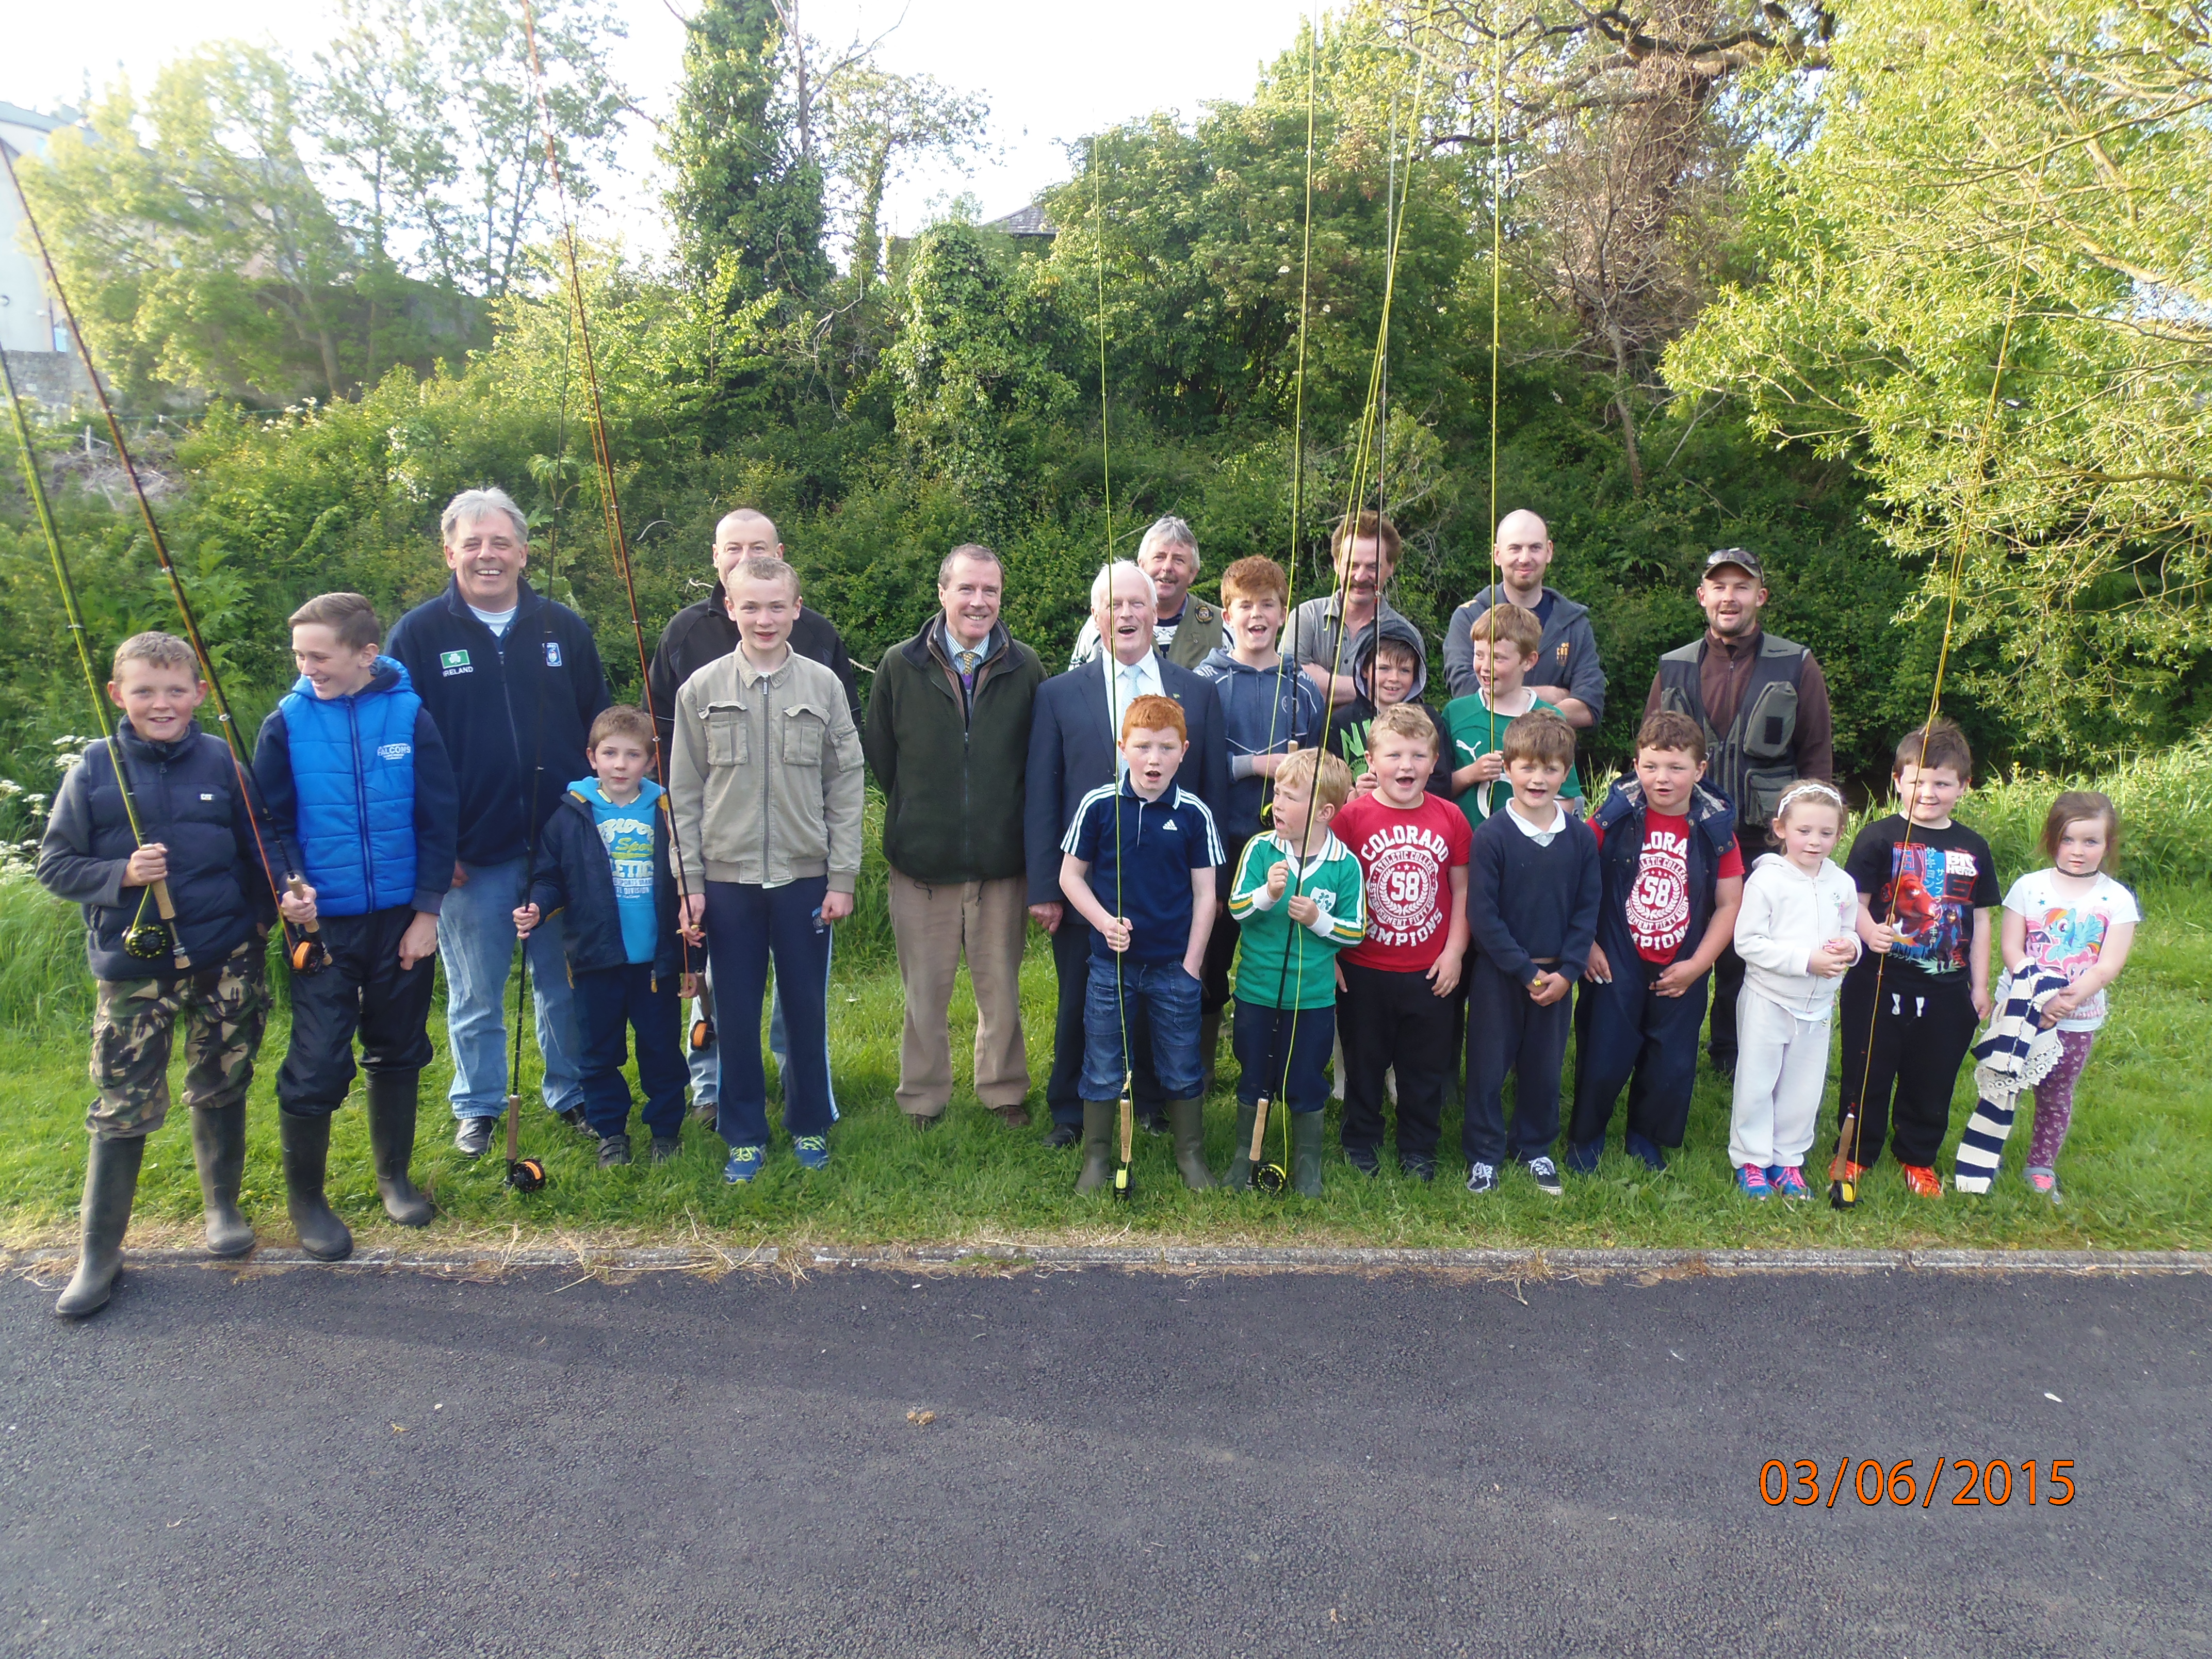 Local Angling Club and children using rods sponsored by Limerick City and County Council